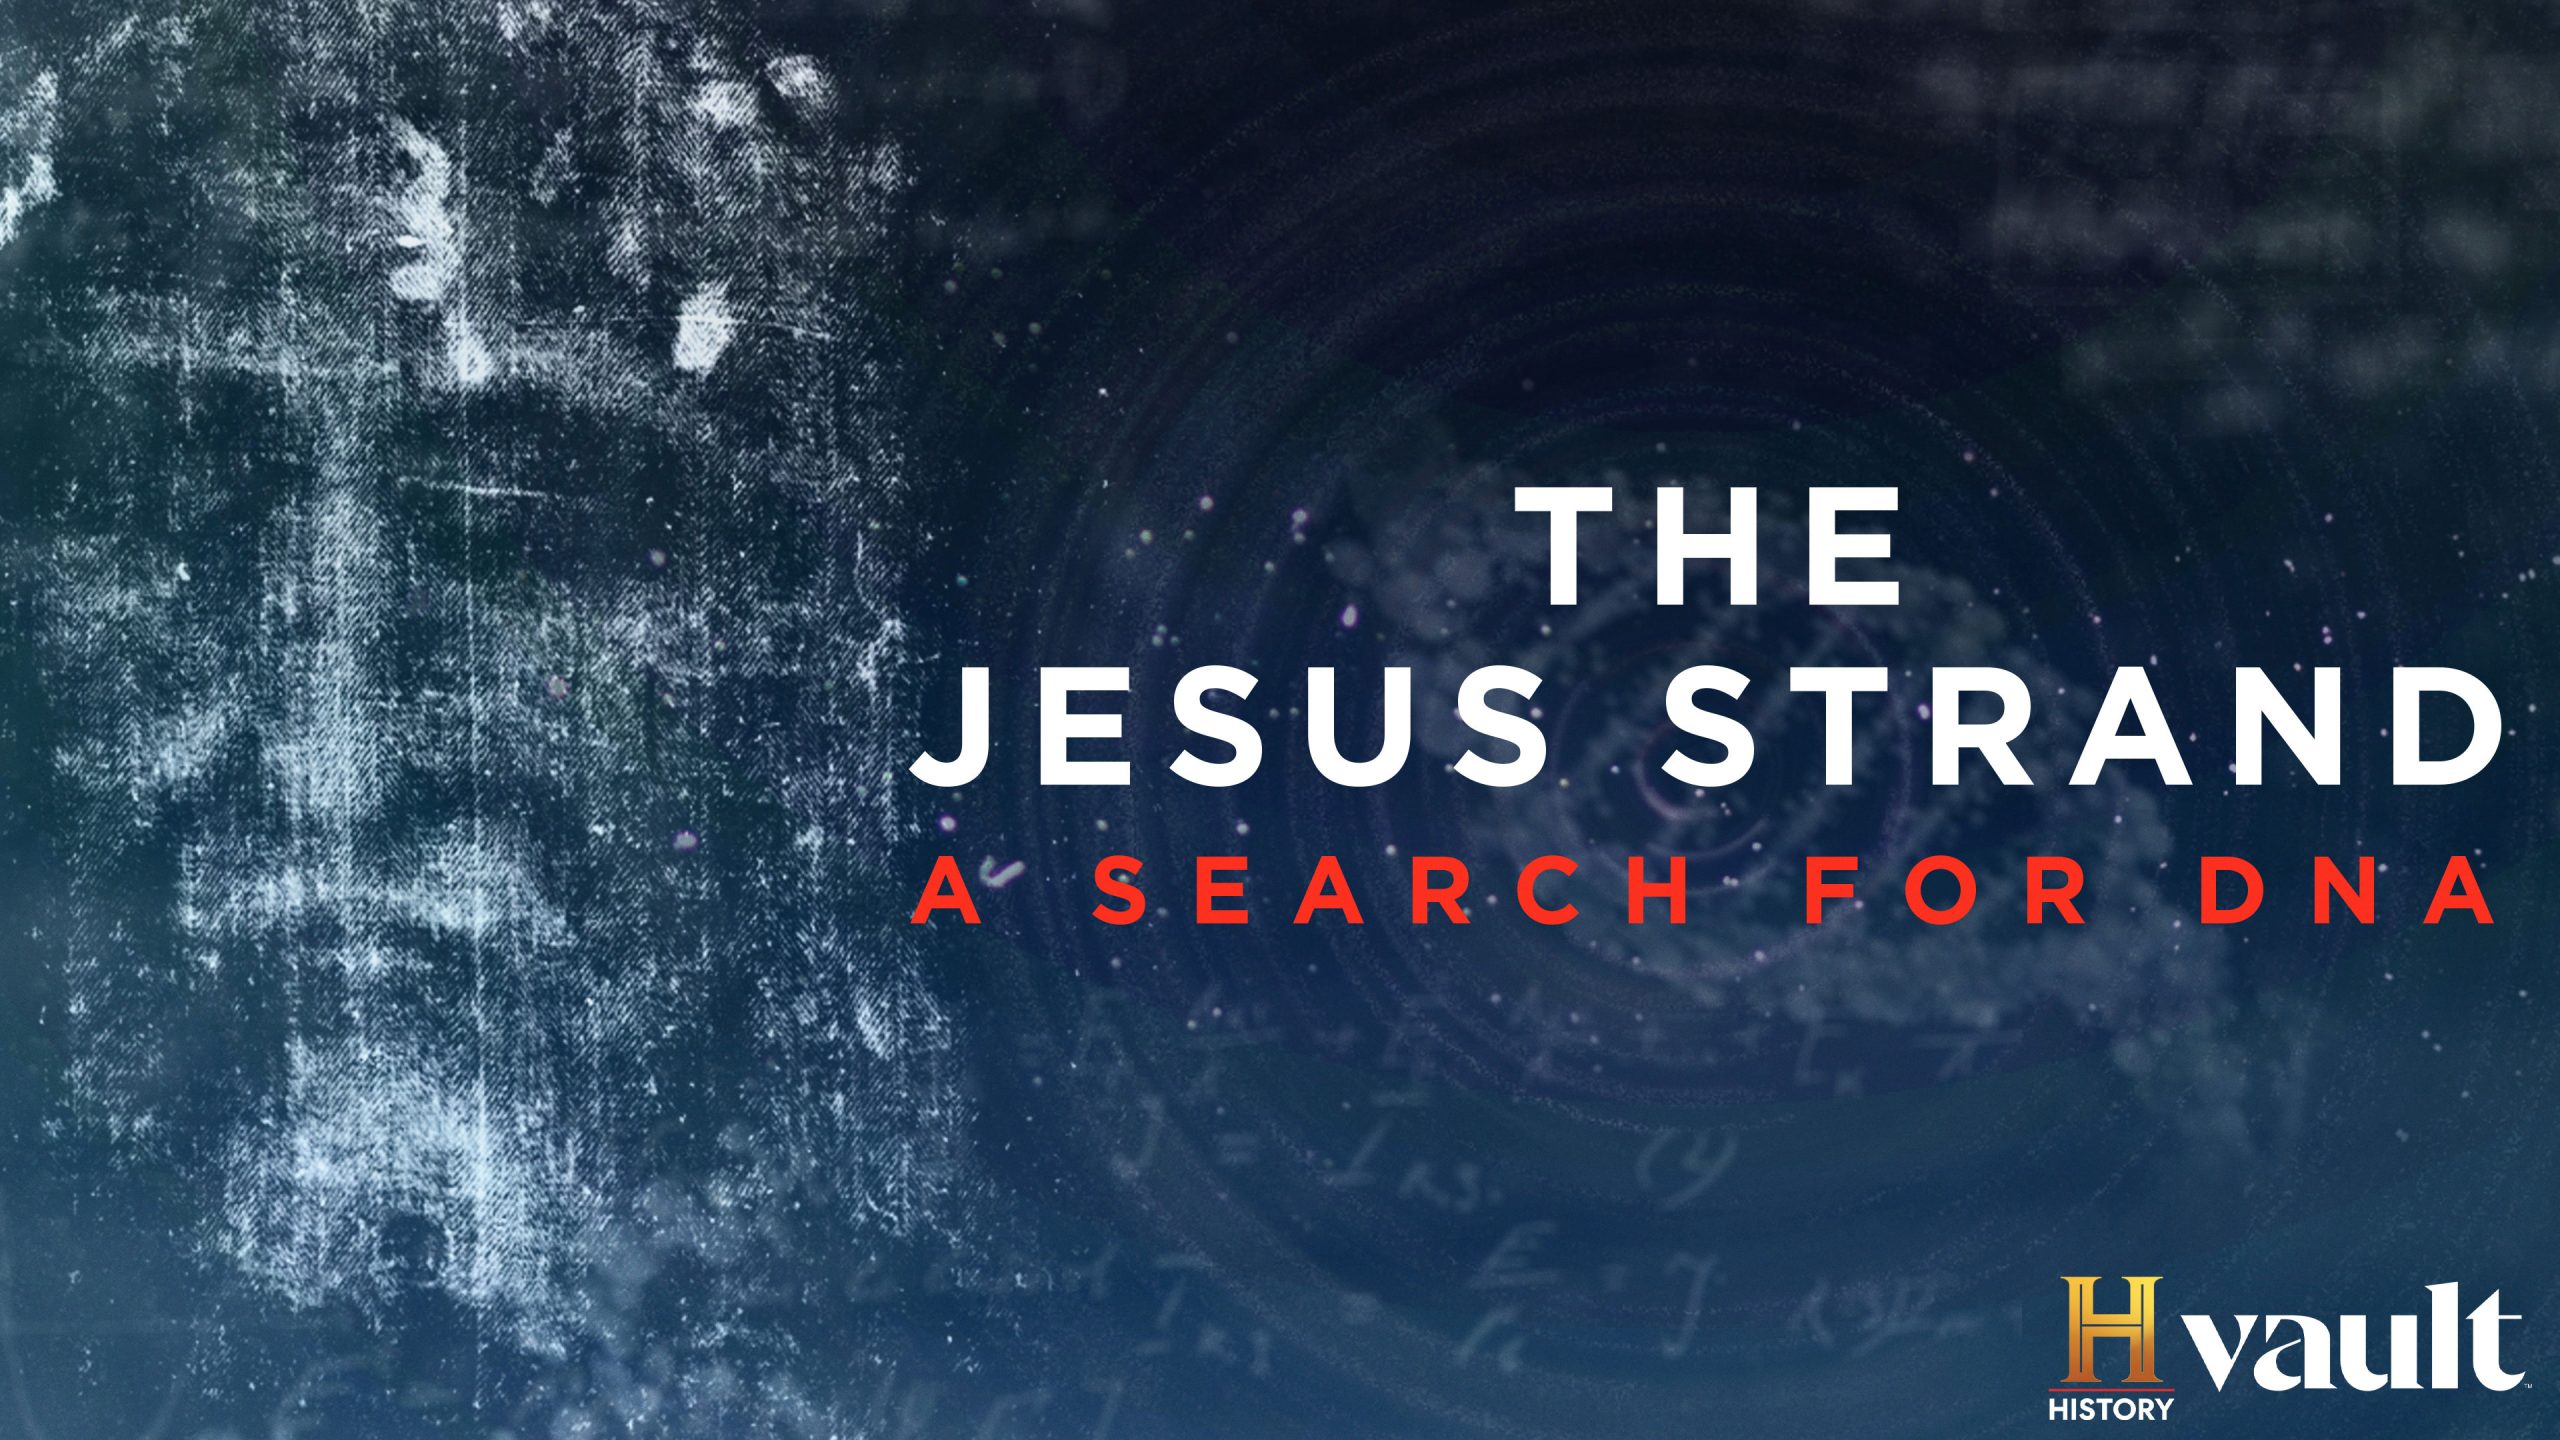 Watch The Jesus Strand: A Search for DNA on HISTORY Vault